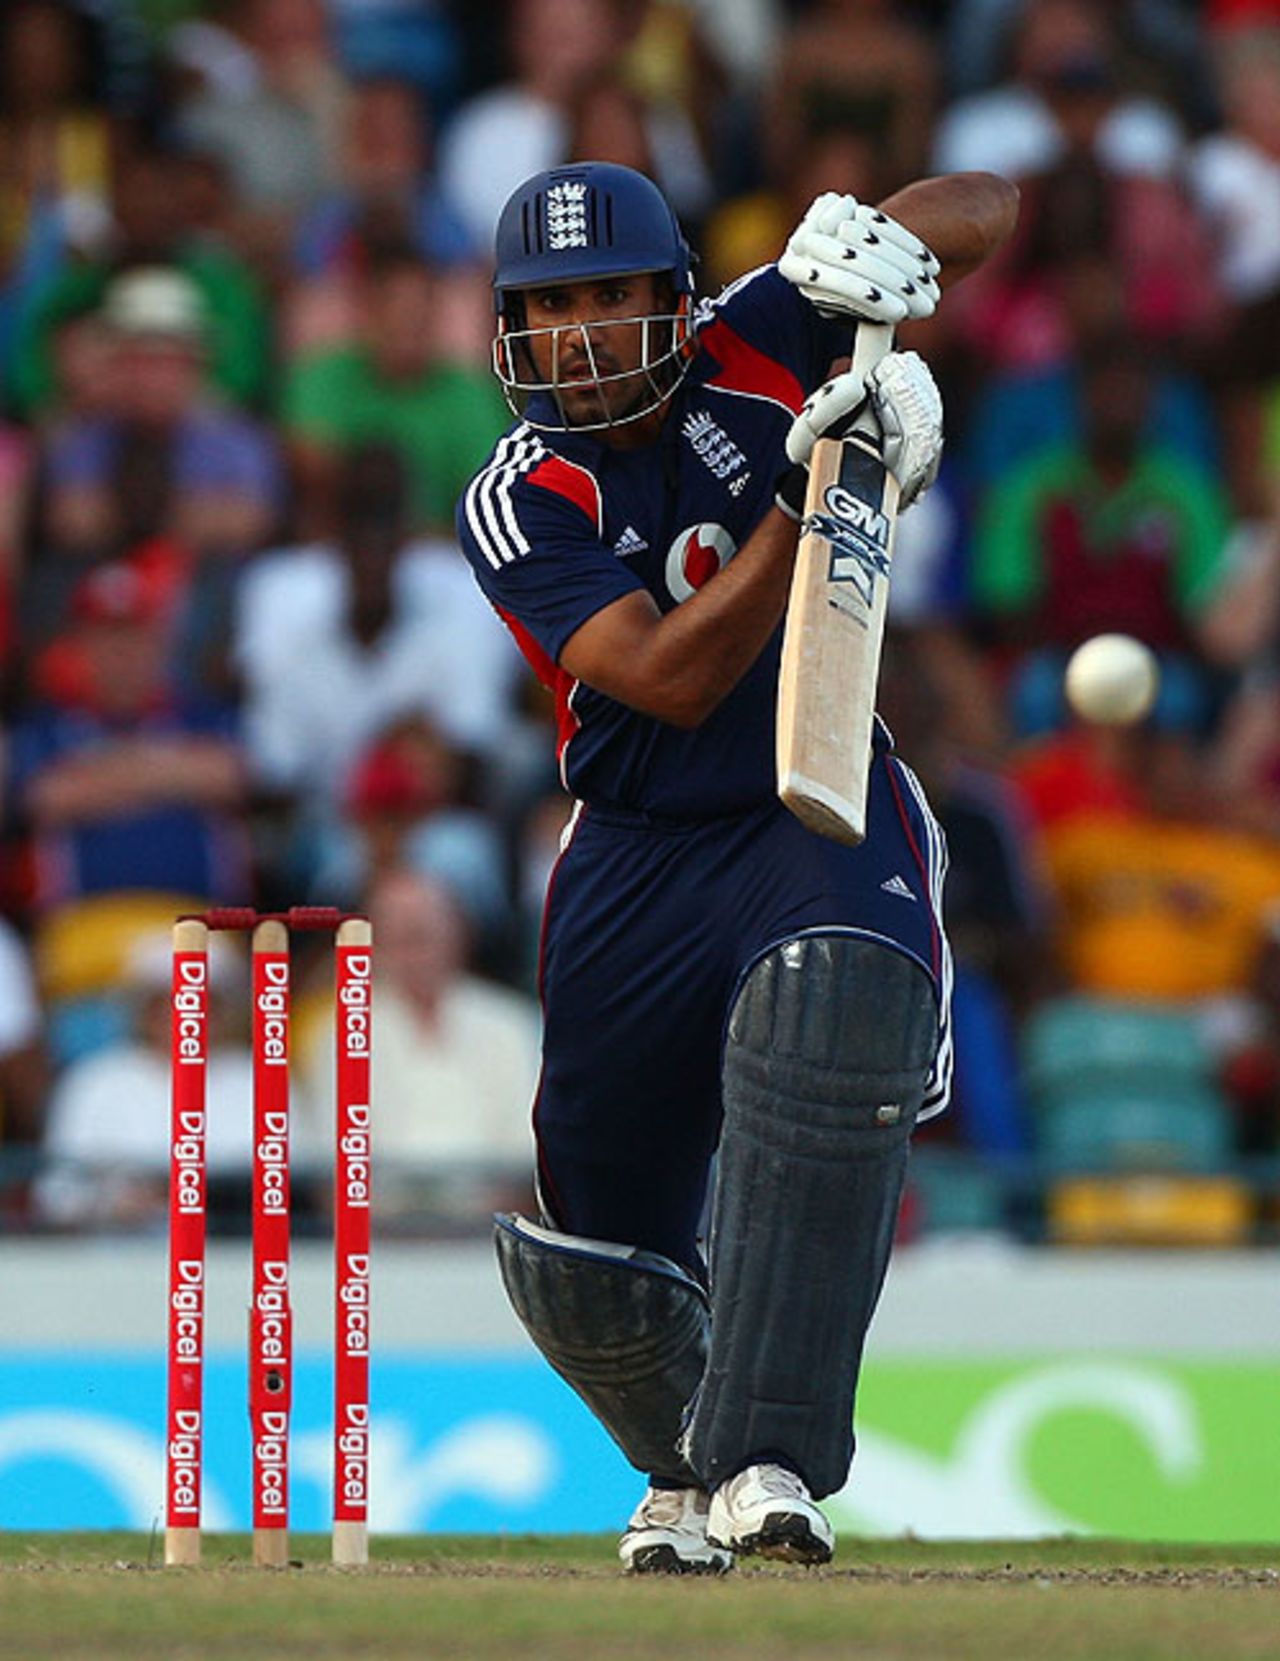 Ravi Bopara played second-fiddle to Andrew Strauss in England's nine-wicket win, West Indies v England, 4th ODI, Bridgetown, March 29, 2009